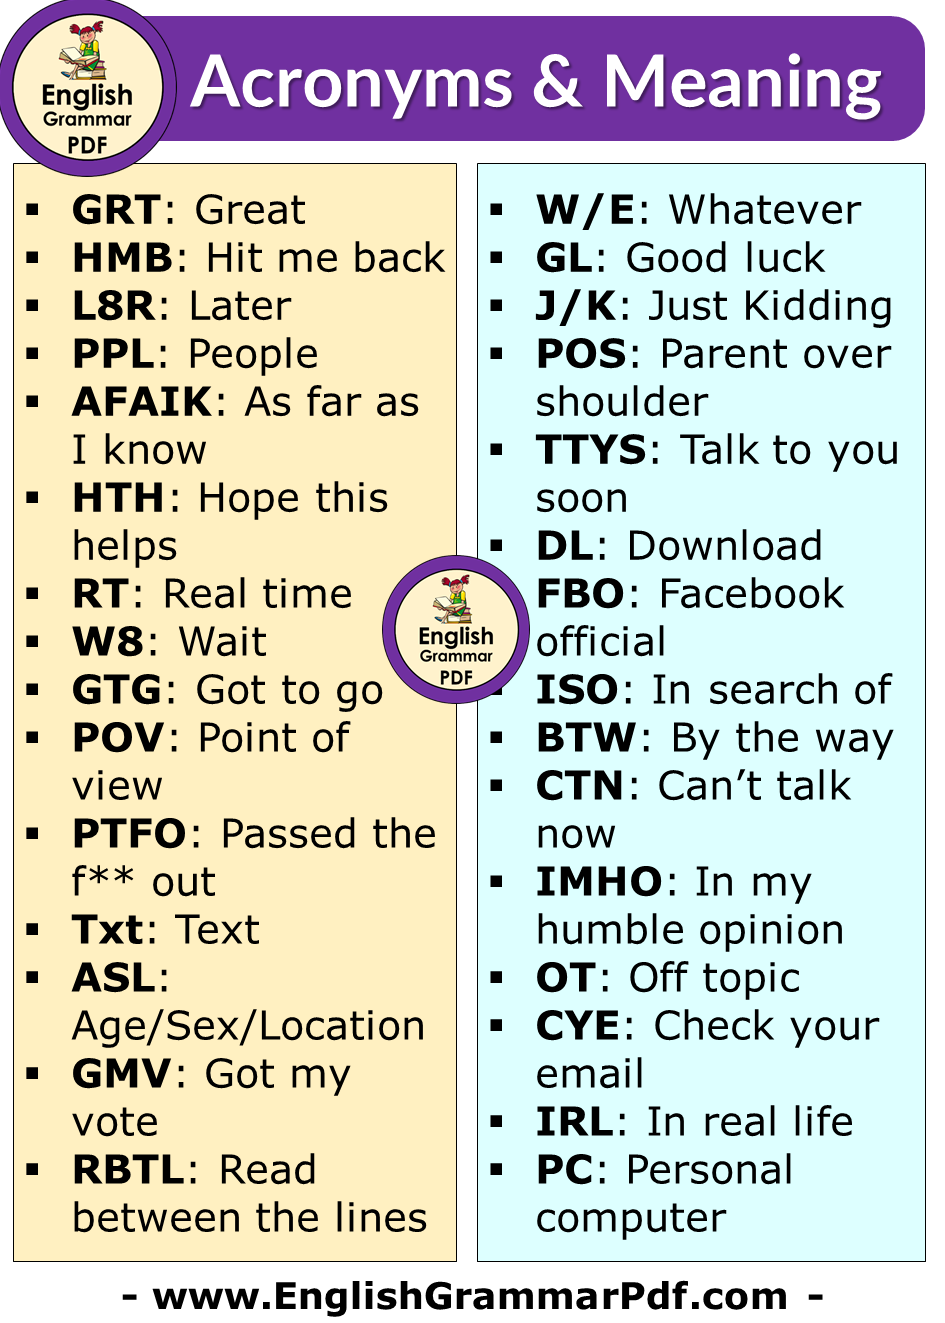 Sex Abbreviations And Acronyms Telegraph 